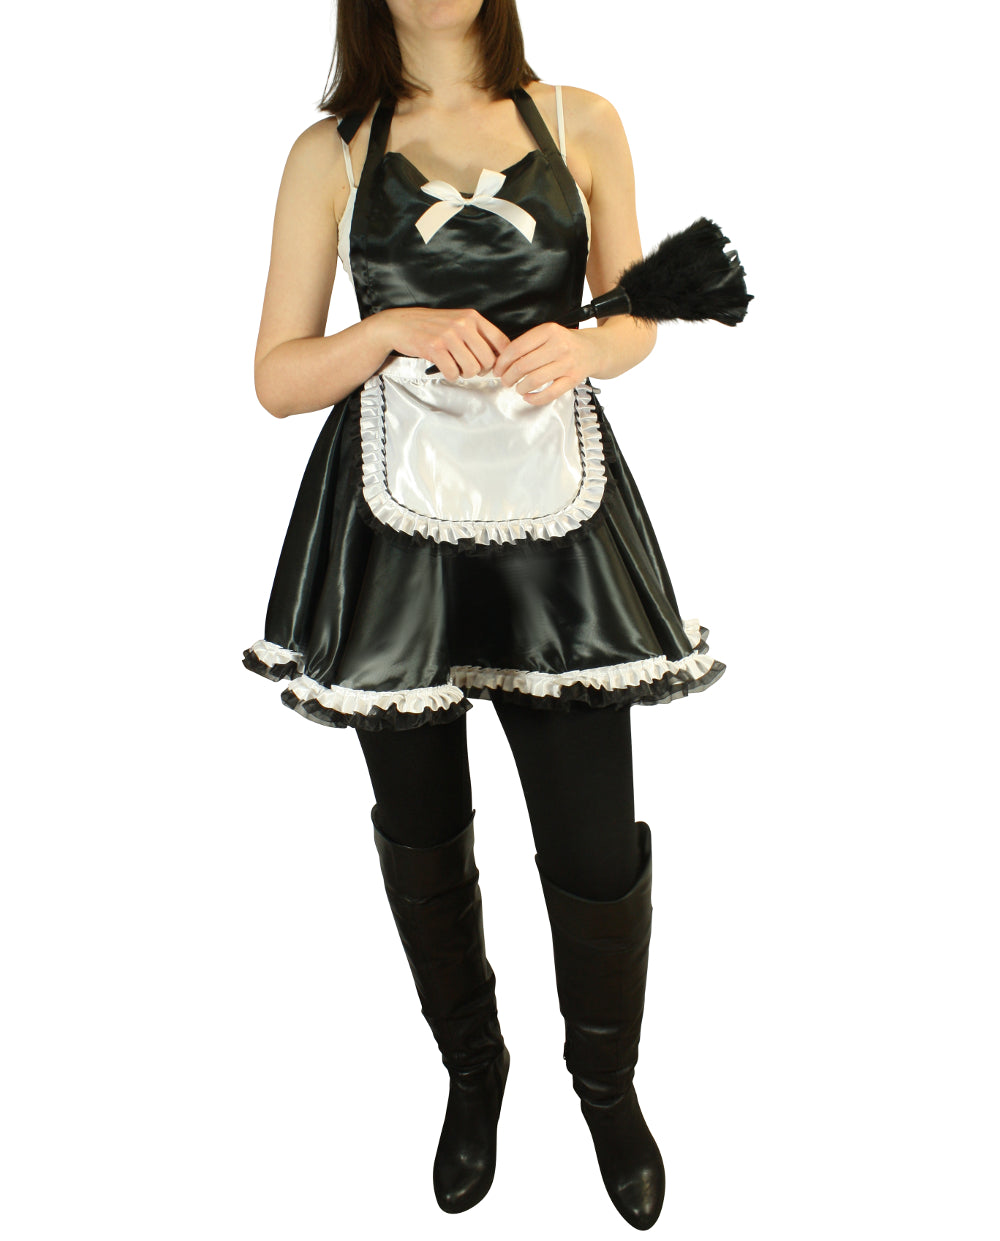 Sexy Lingerie - The French Maid by Tipsy Totes